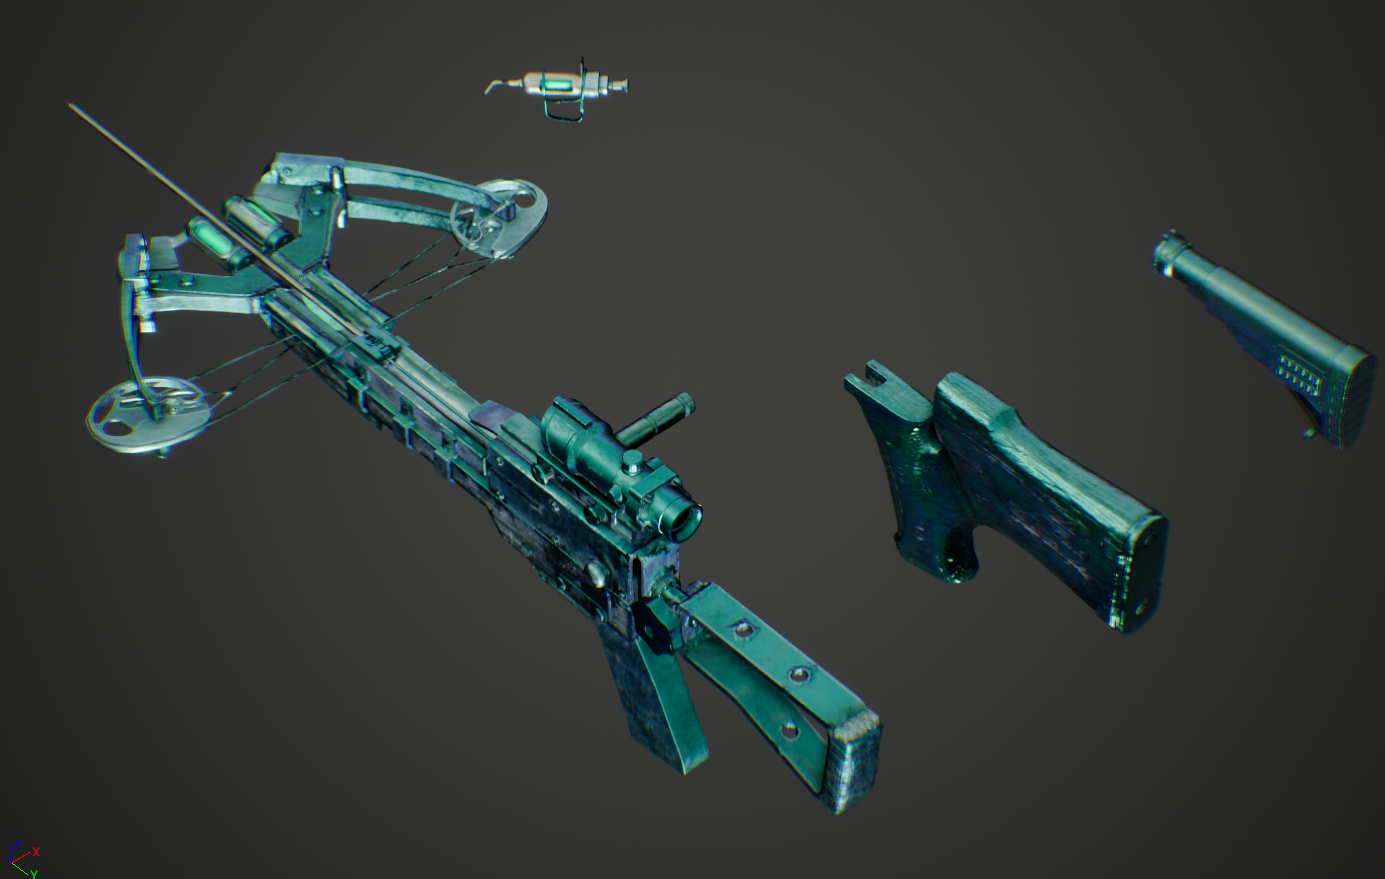 High Tech Weaponry Update news - Shadow Survival - IndieDB